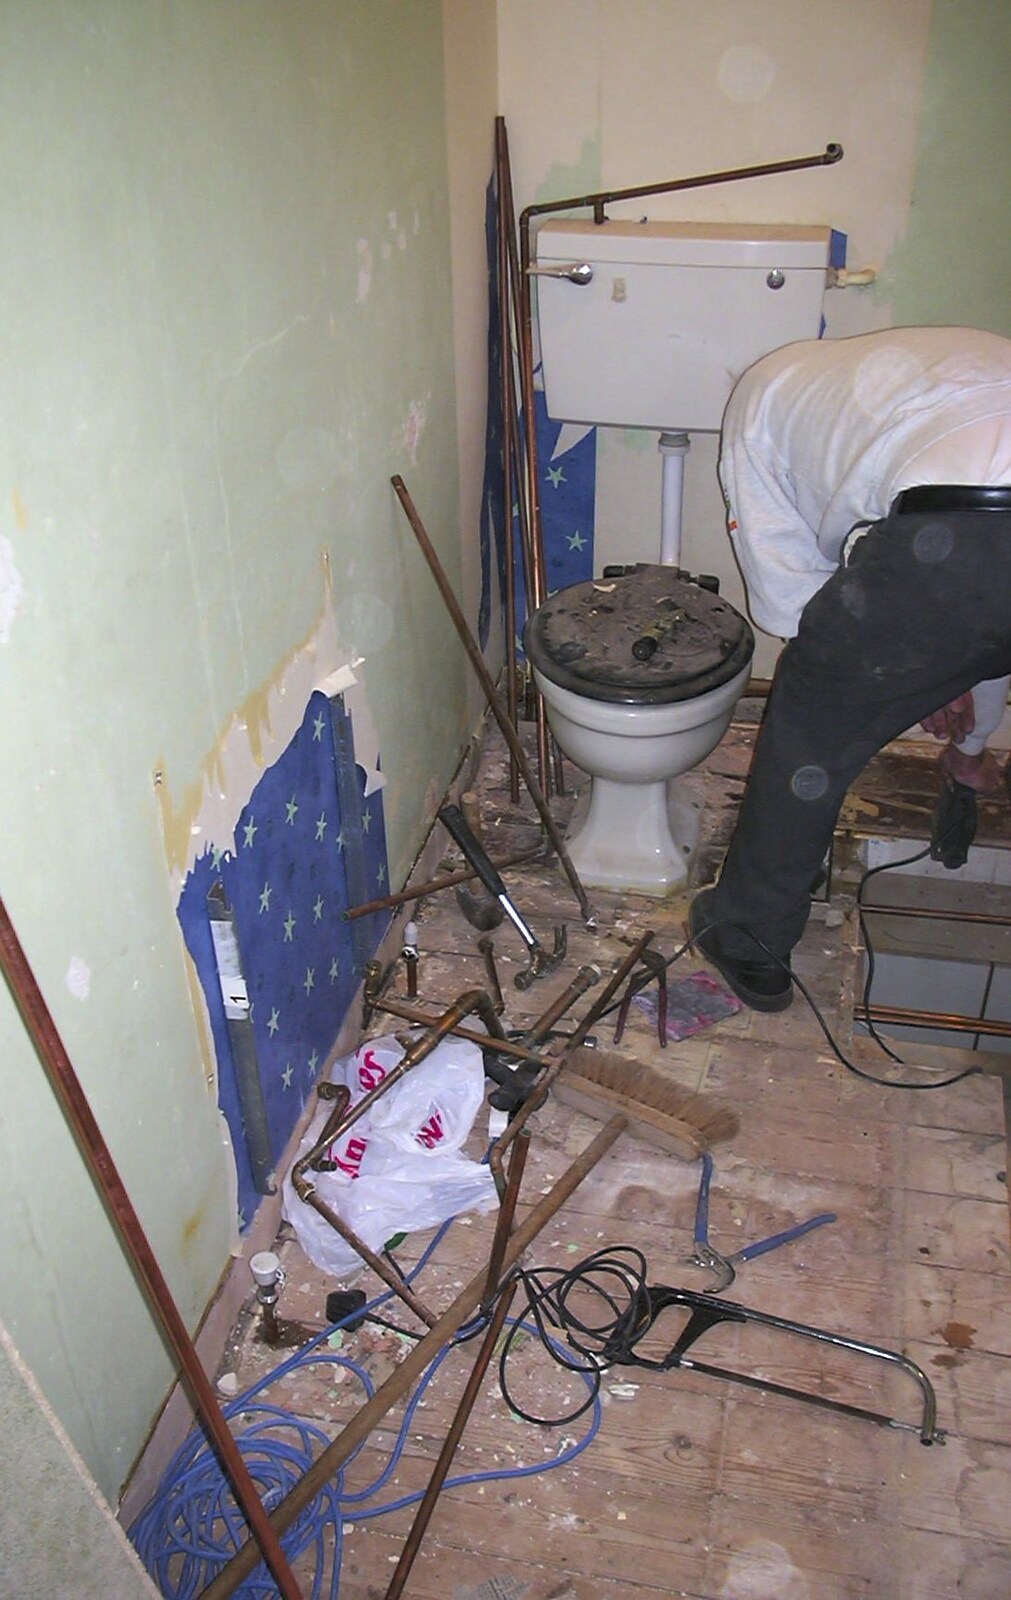 The Old Man pokes around near the toilet from Bathroom Rebuilding, Brome, Suffolk - 1st February 2002